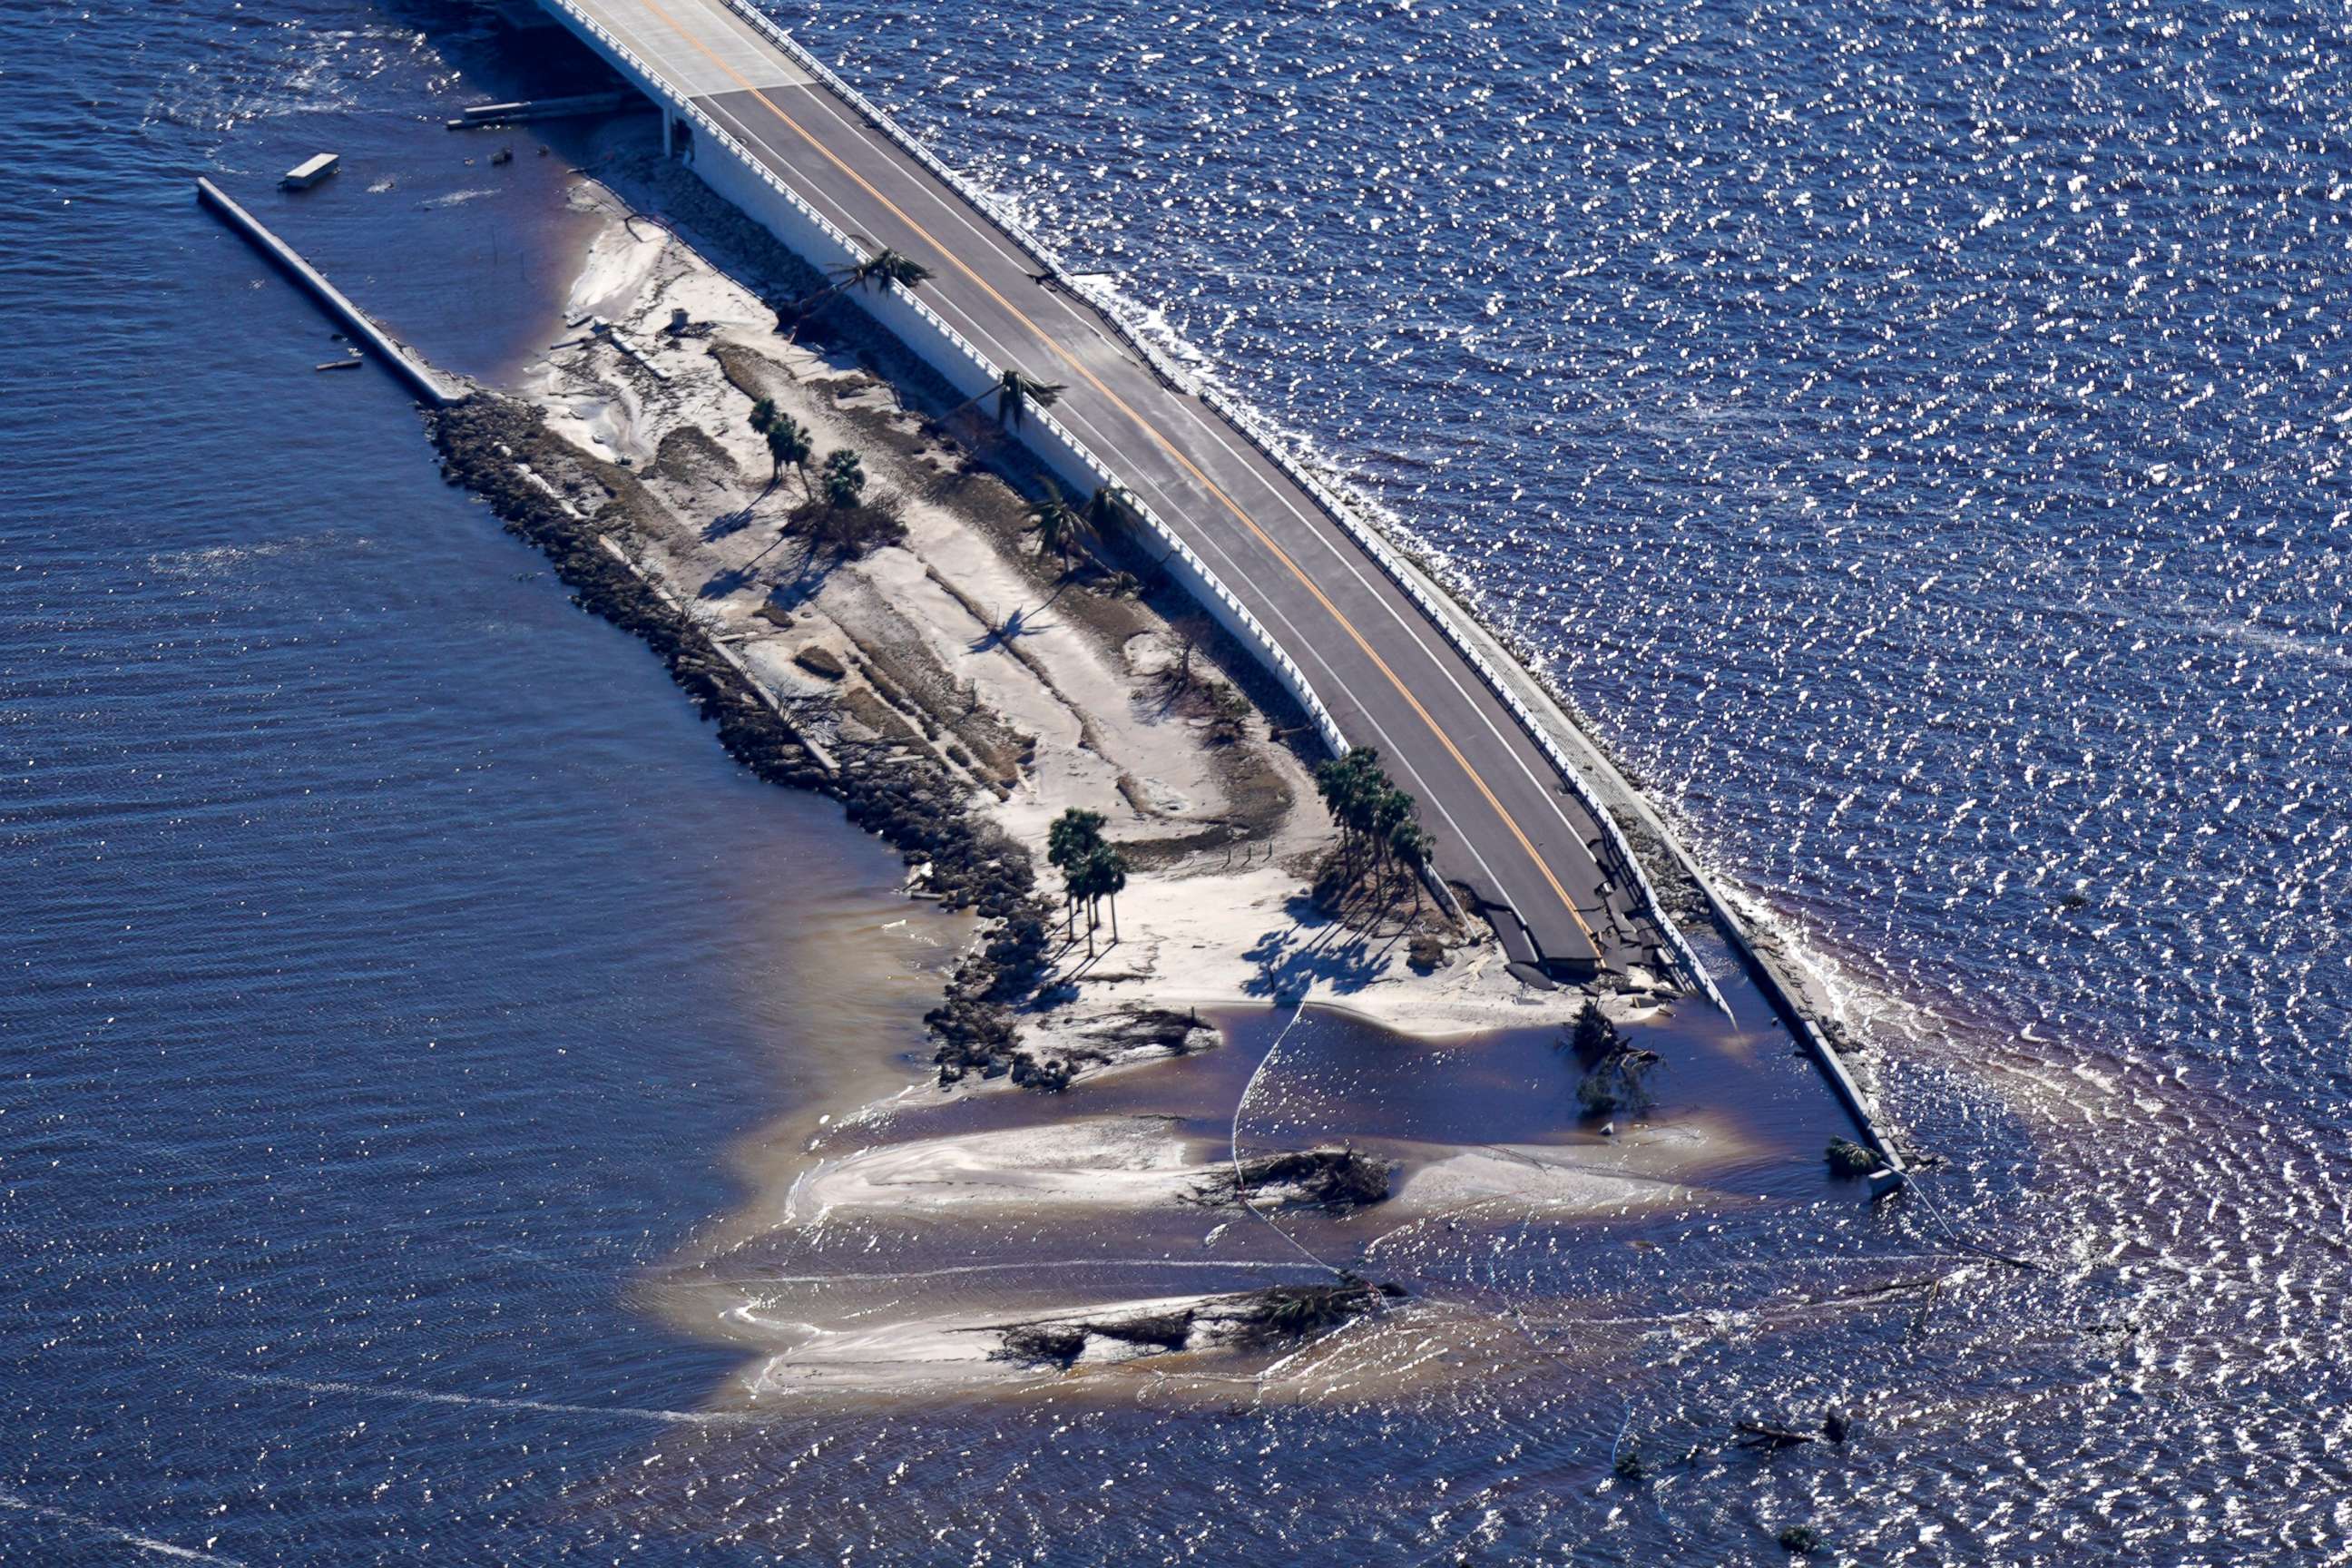 PHOTO: Damage from Hurricane Ian is seen on the causeway leading to Sanibel Island from Fort Myers, Fla., in this aerial photo made in a flight provided by mediccorps.org, on Sept. 30, 2022.